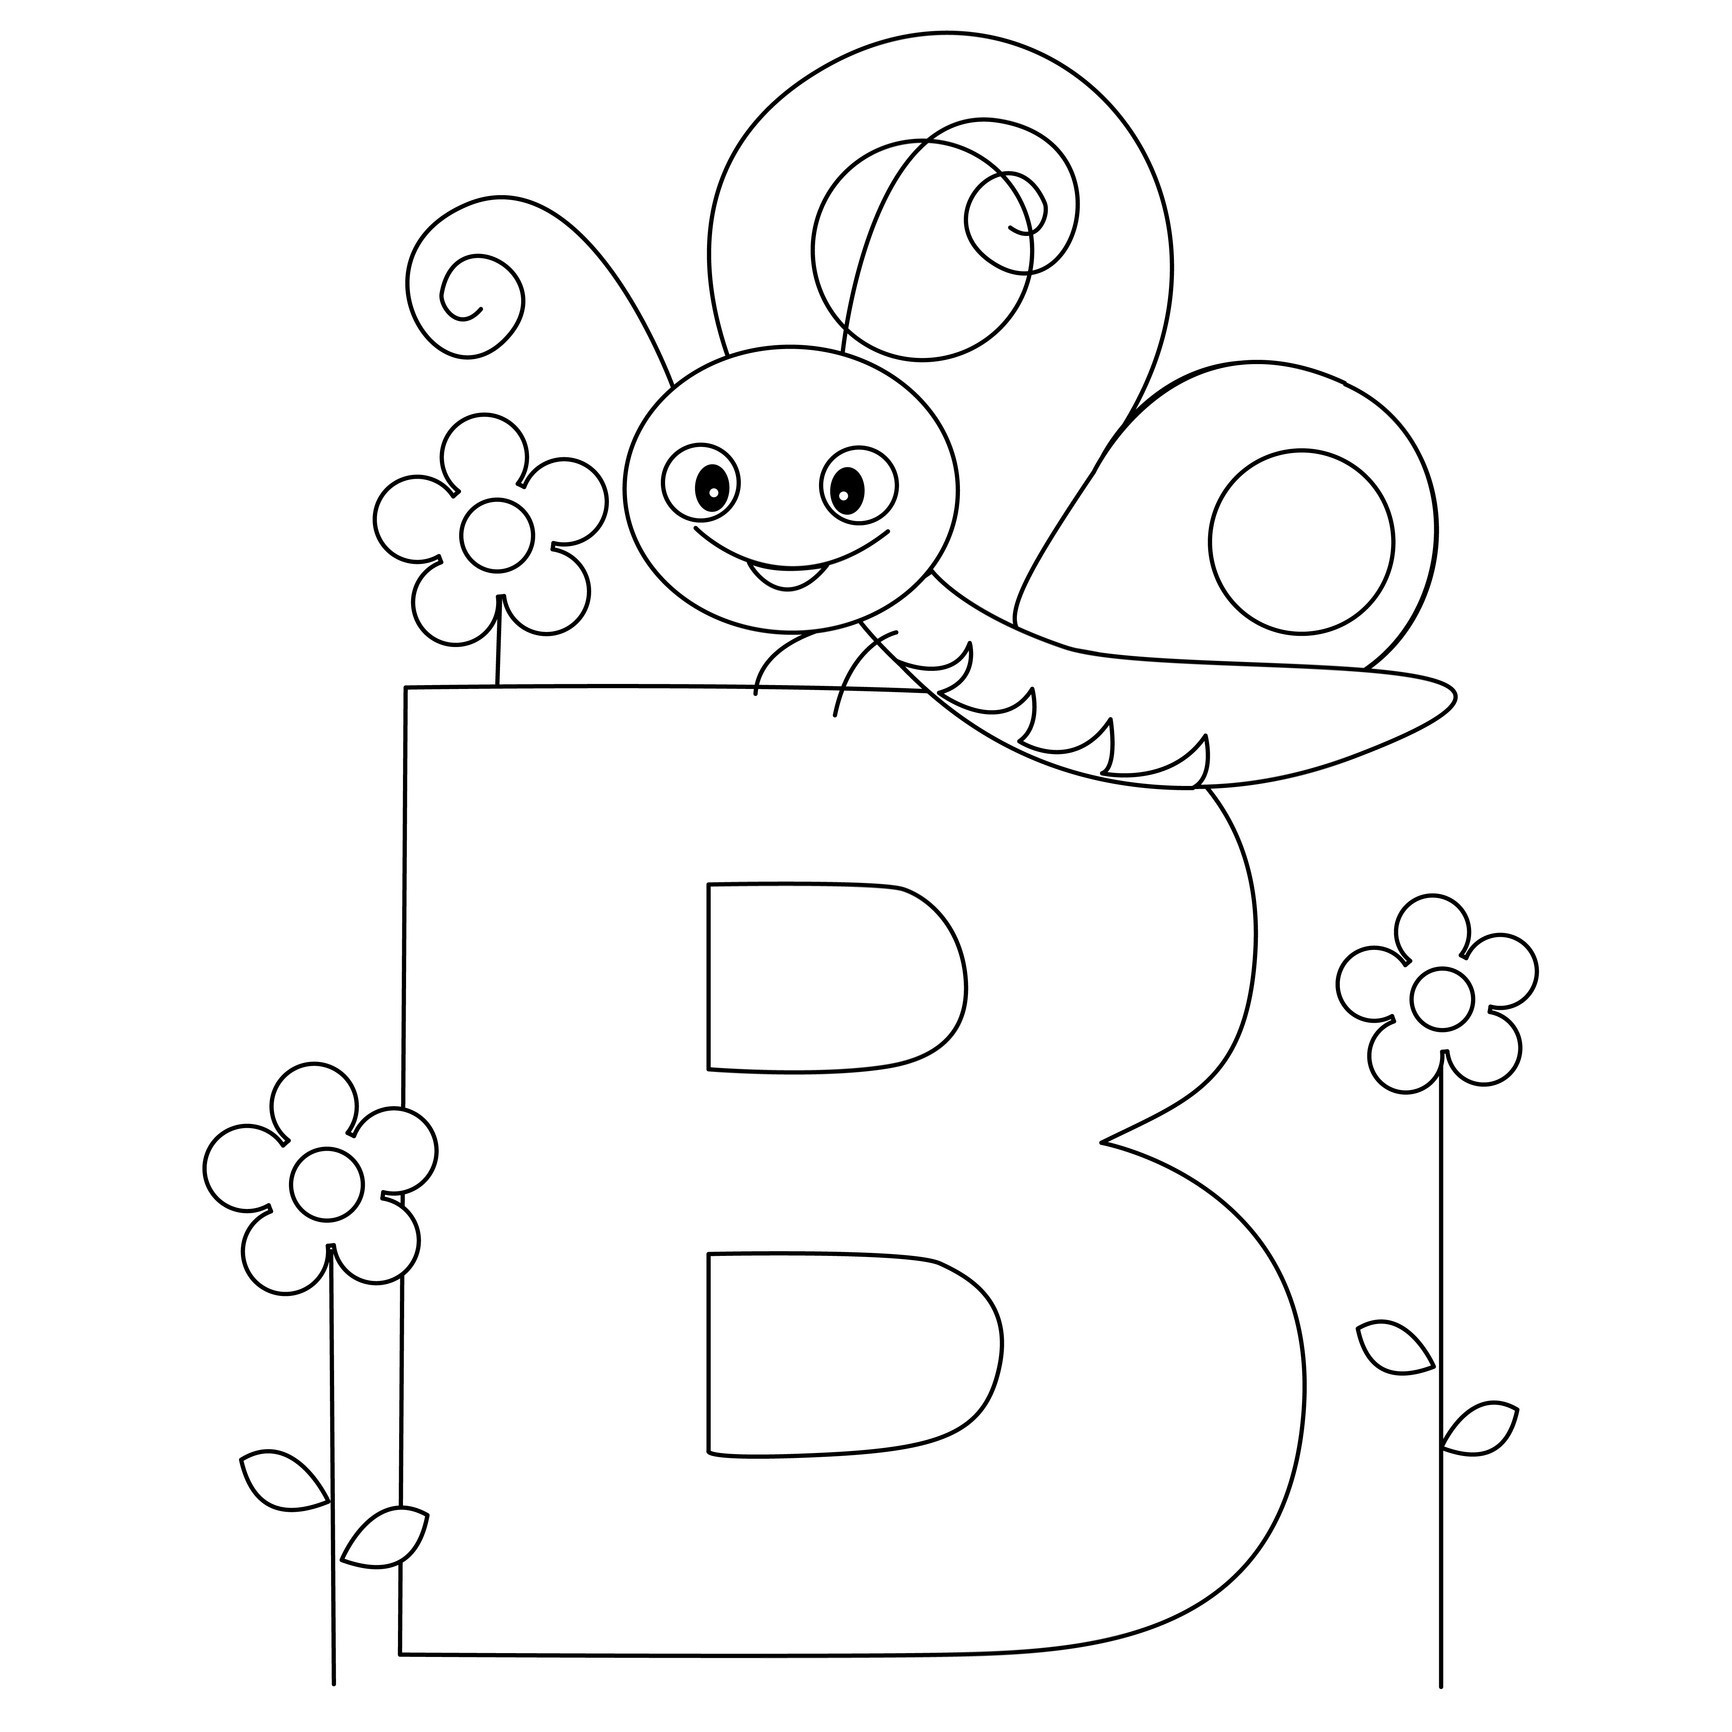 Letter B Coloring Pages For Toddlers
 Free Printable Alphabet Coloring Pages for Kids Best